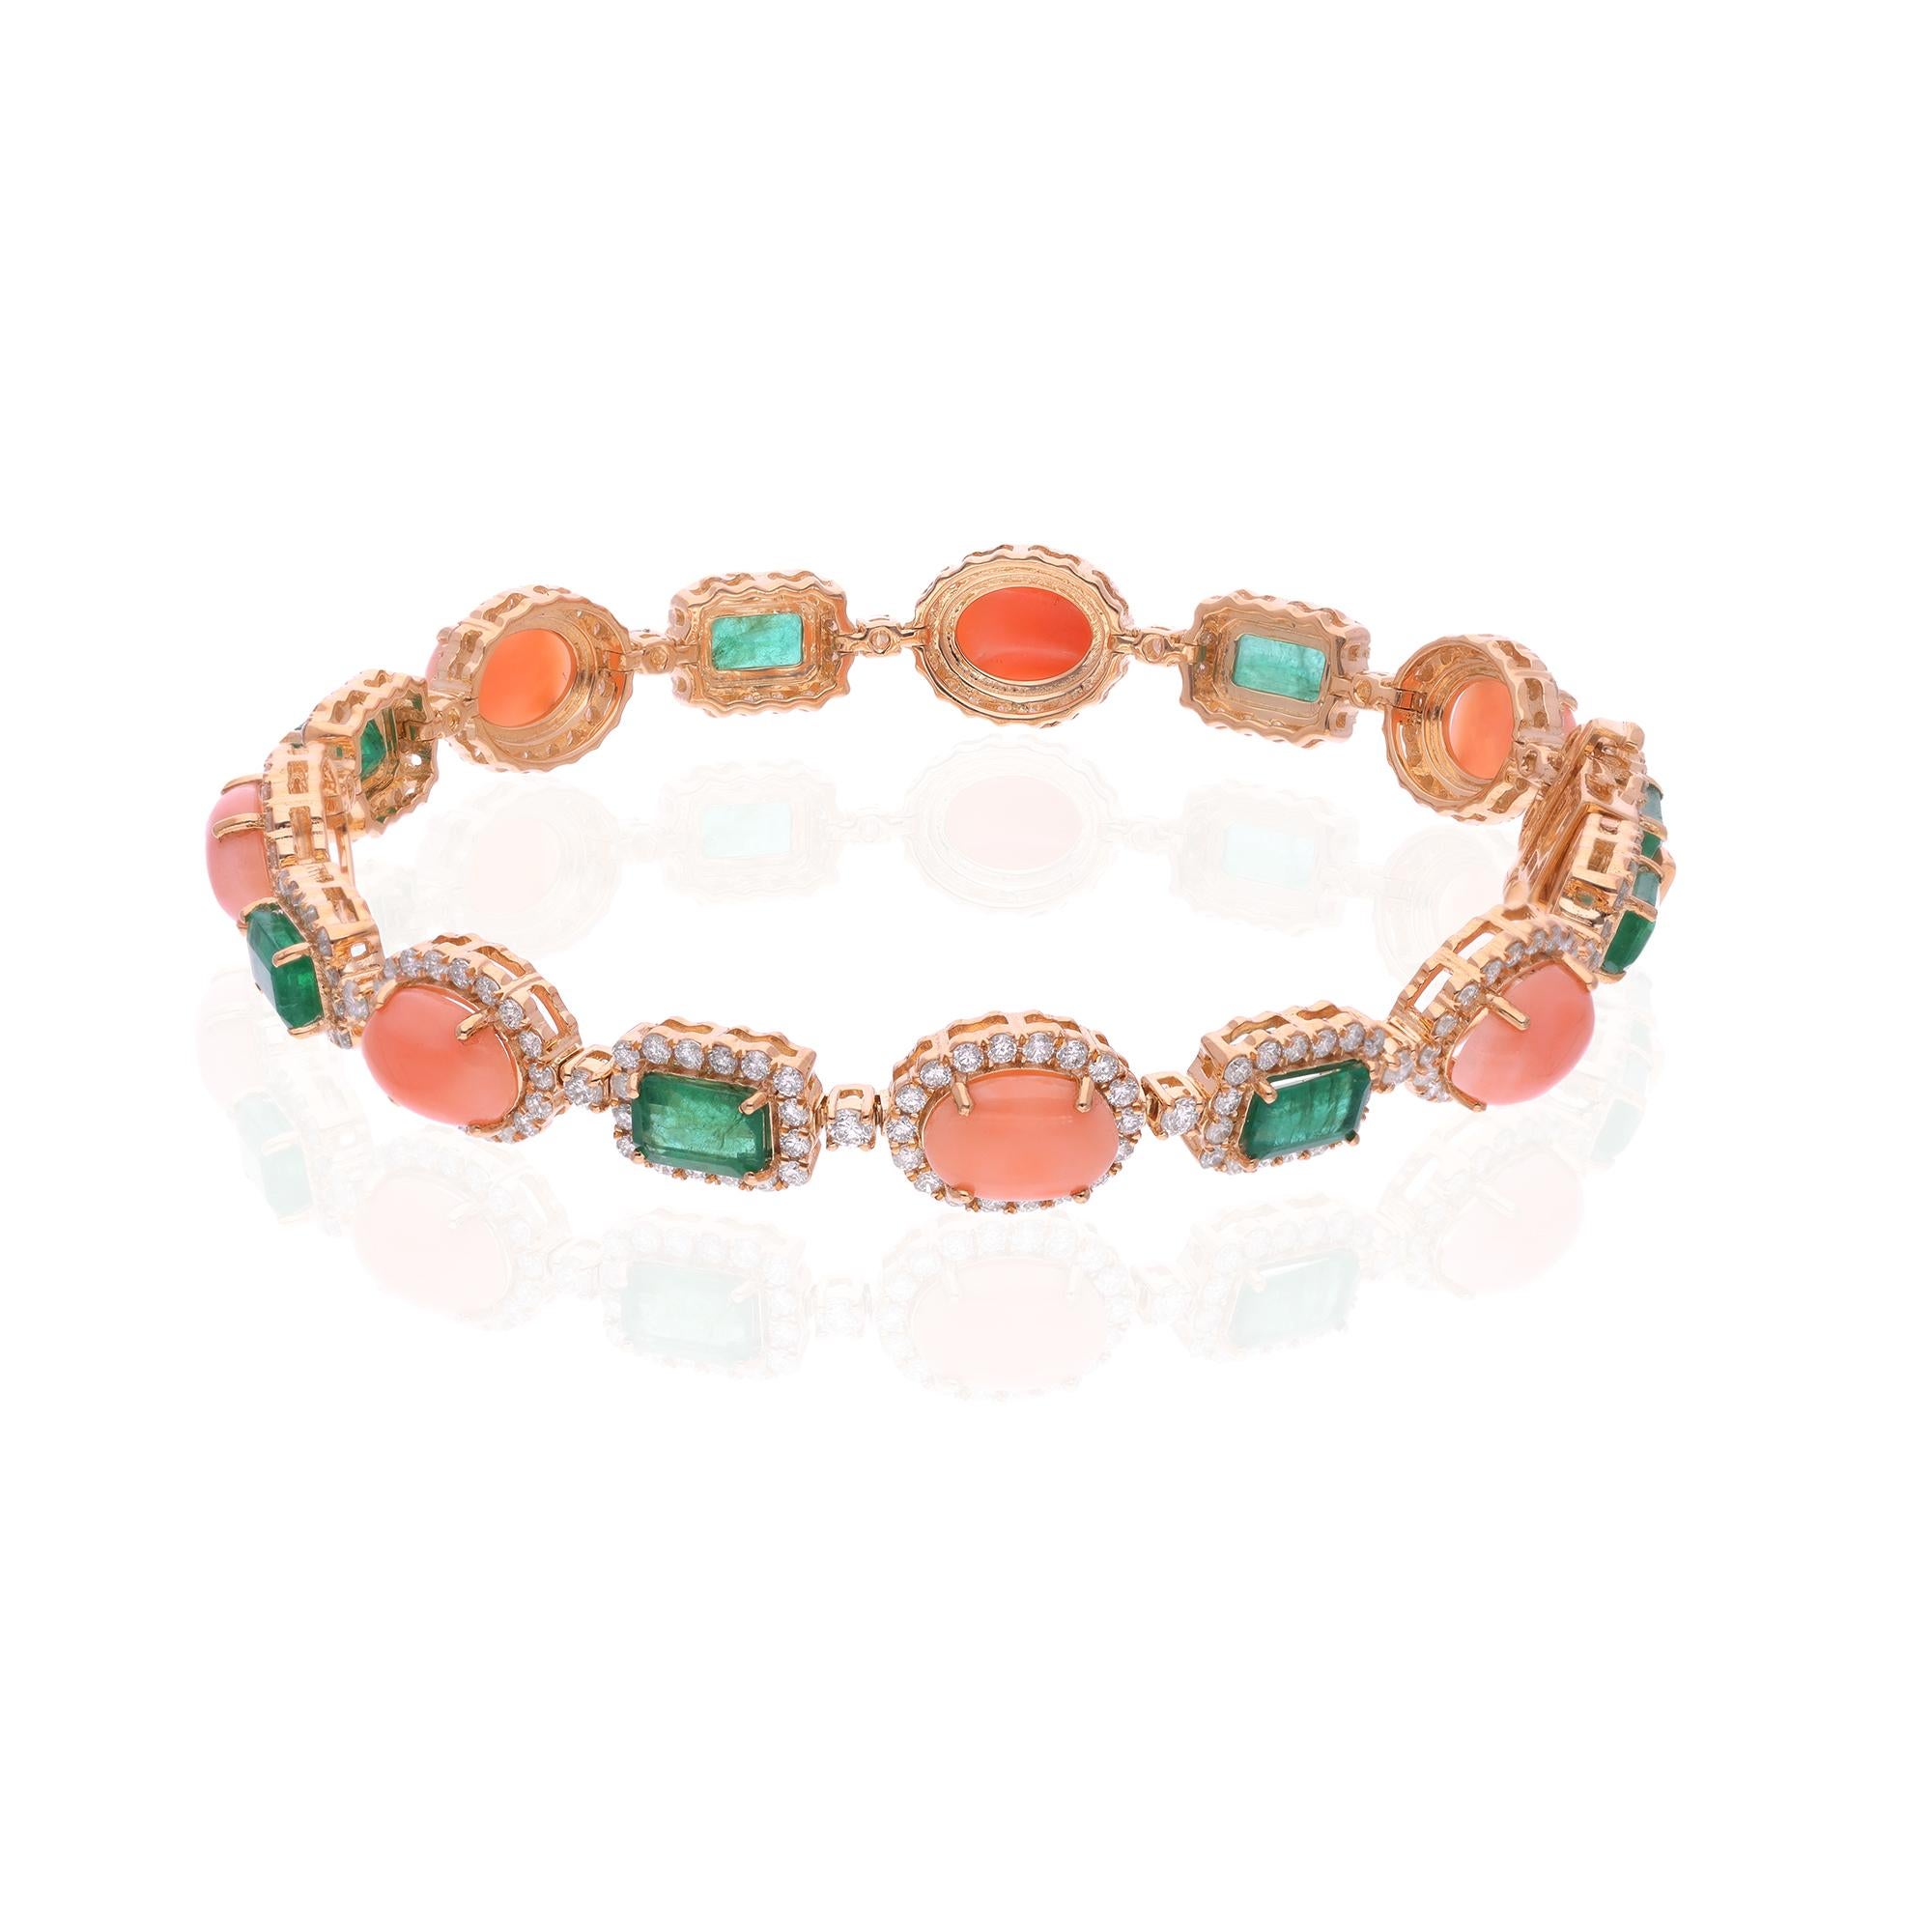 Each coral bead is a natural marvel, boasting a distinctive shade of red-orange that exudes warmth and vitality. Their smooth, polished surfaces reflect light with a captivating glow, imparting a sense of effortless glamour to any ensemble.

Item